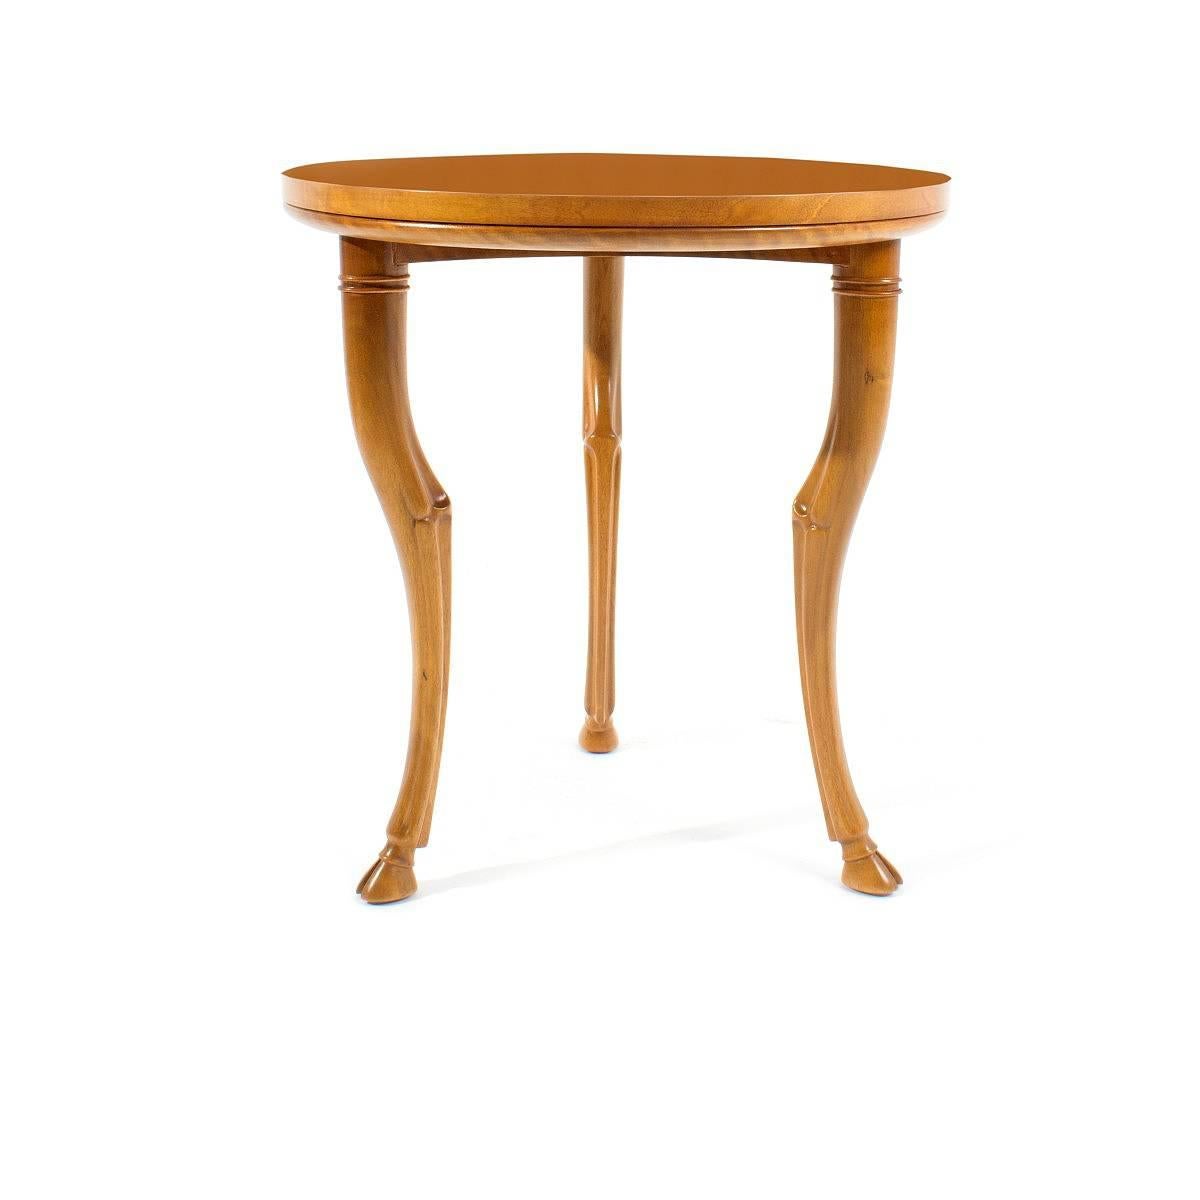 A Trapeza table by T.H. Robsjohn-Gibbings.  Manufactured by Saridis of Athens.  Signed.  circa 1940.
